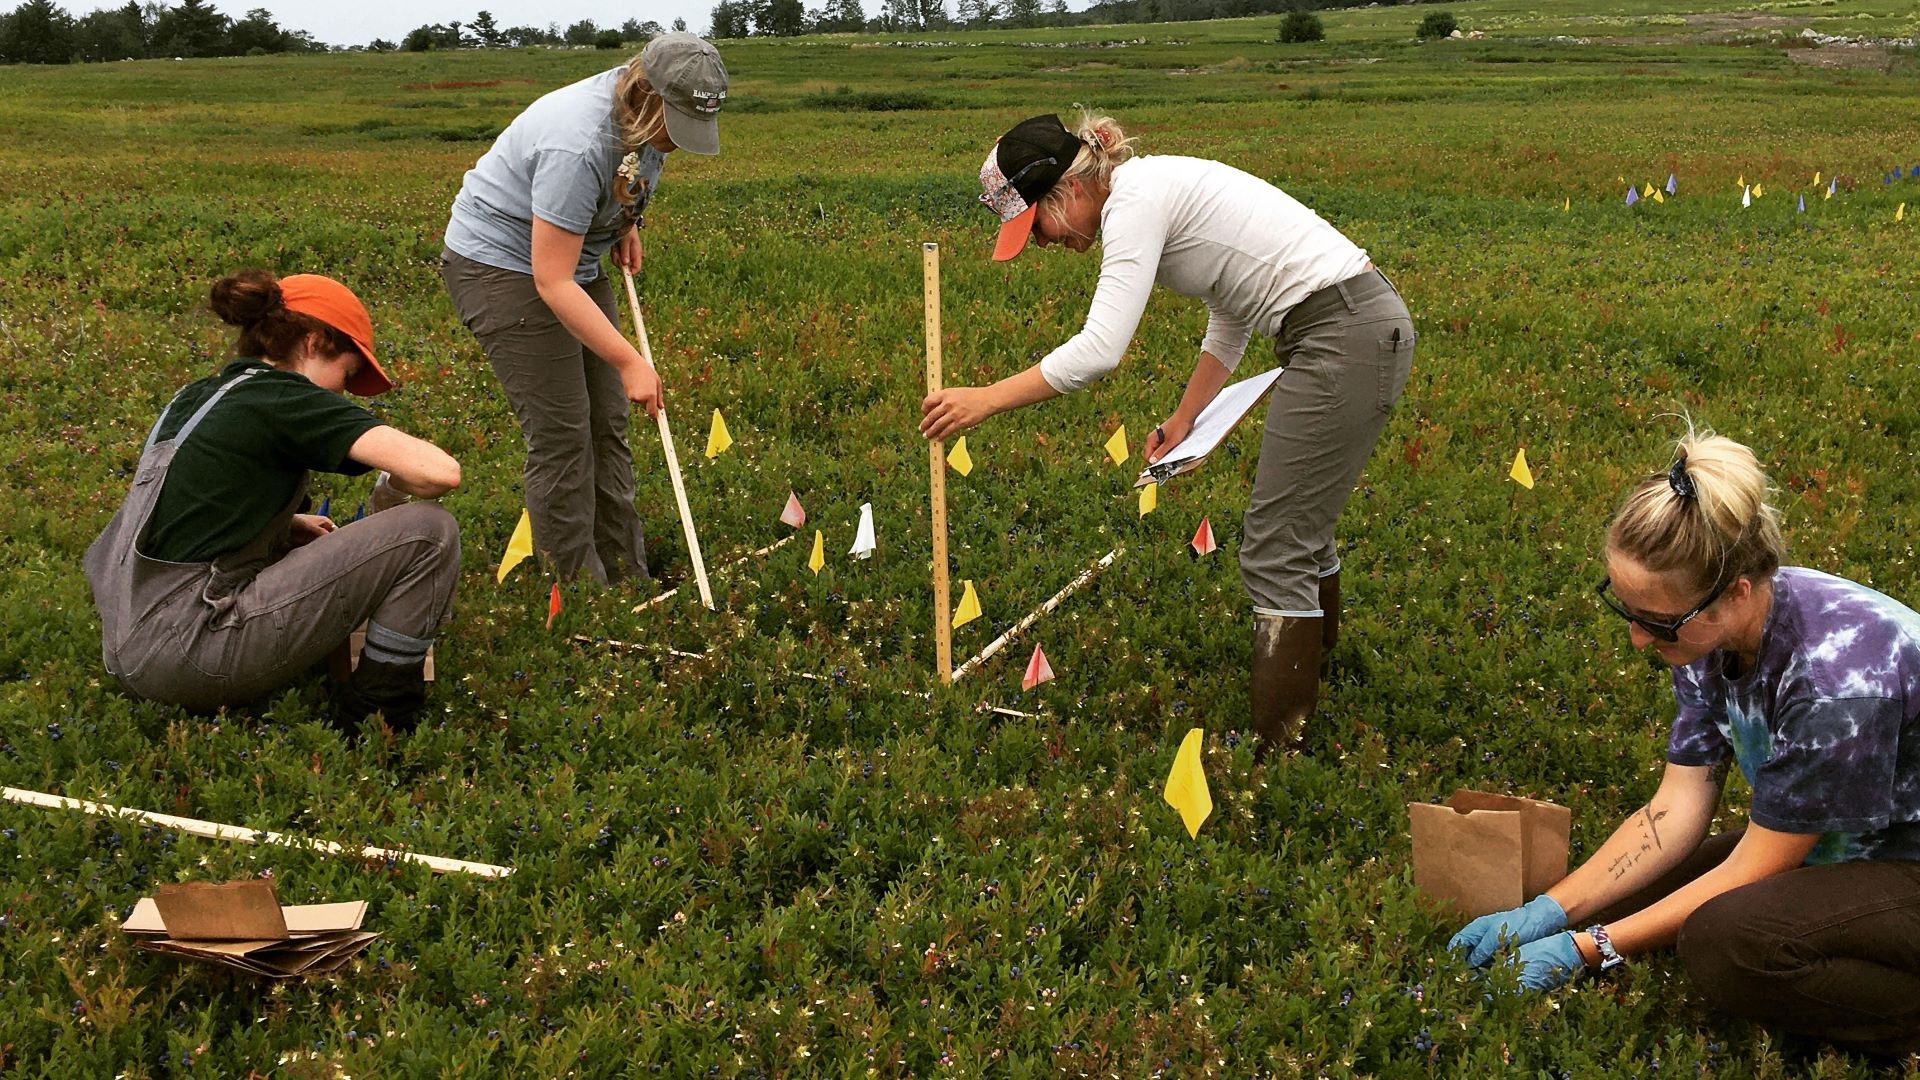 Four student researchers from the University conduct their research in a blueberry field. Two are standing while they take measurements with yardsticks while two others are crouching and making observations of the crops.